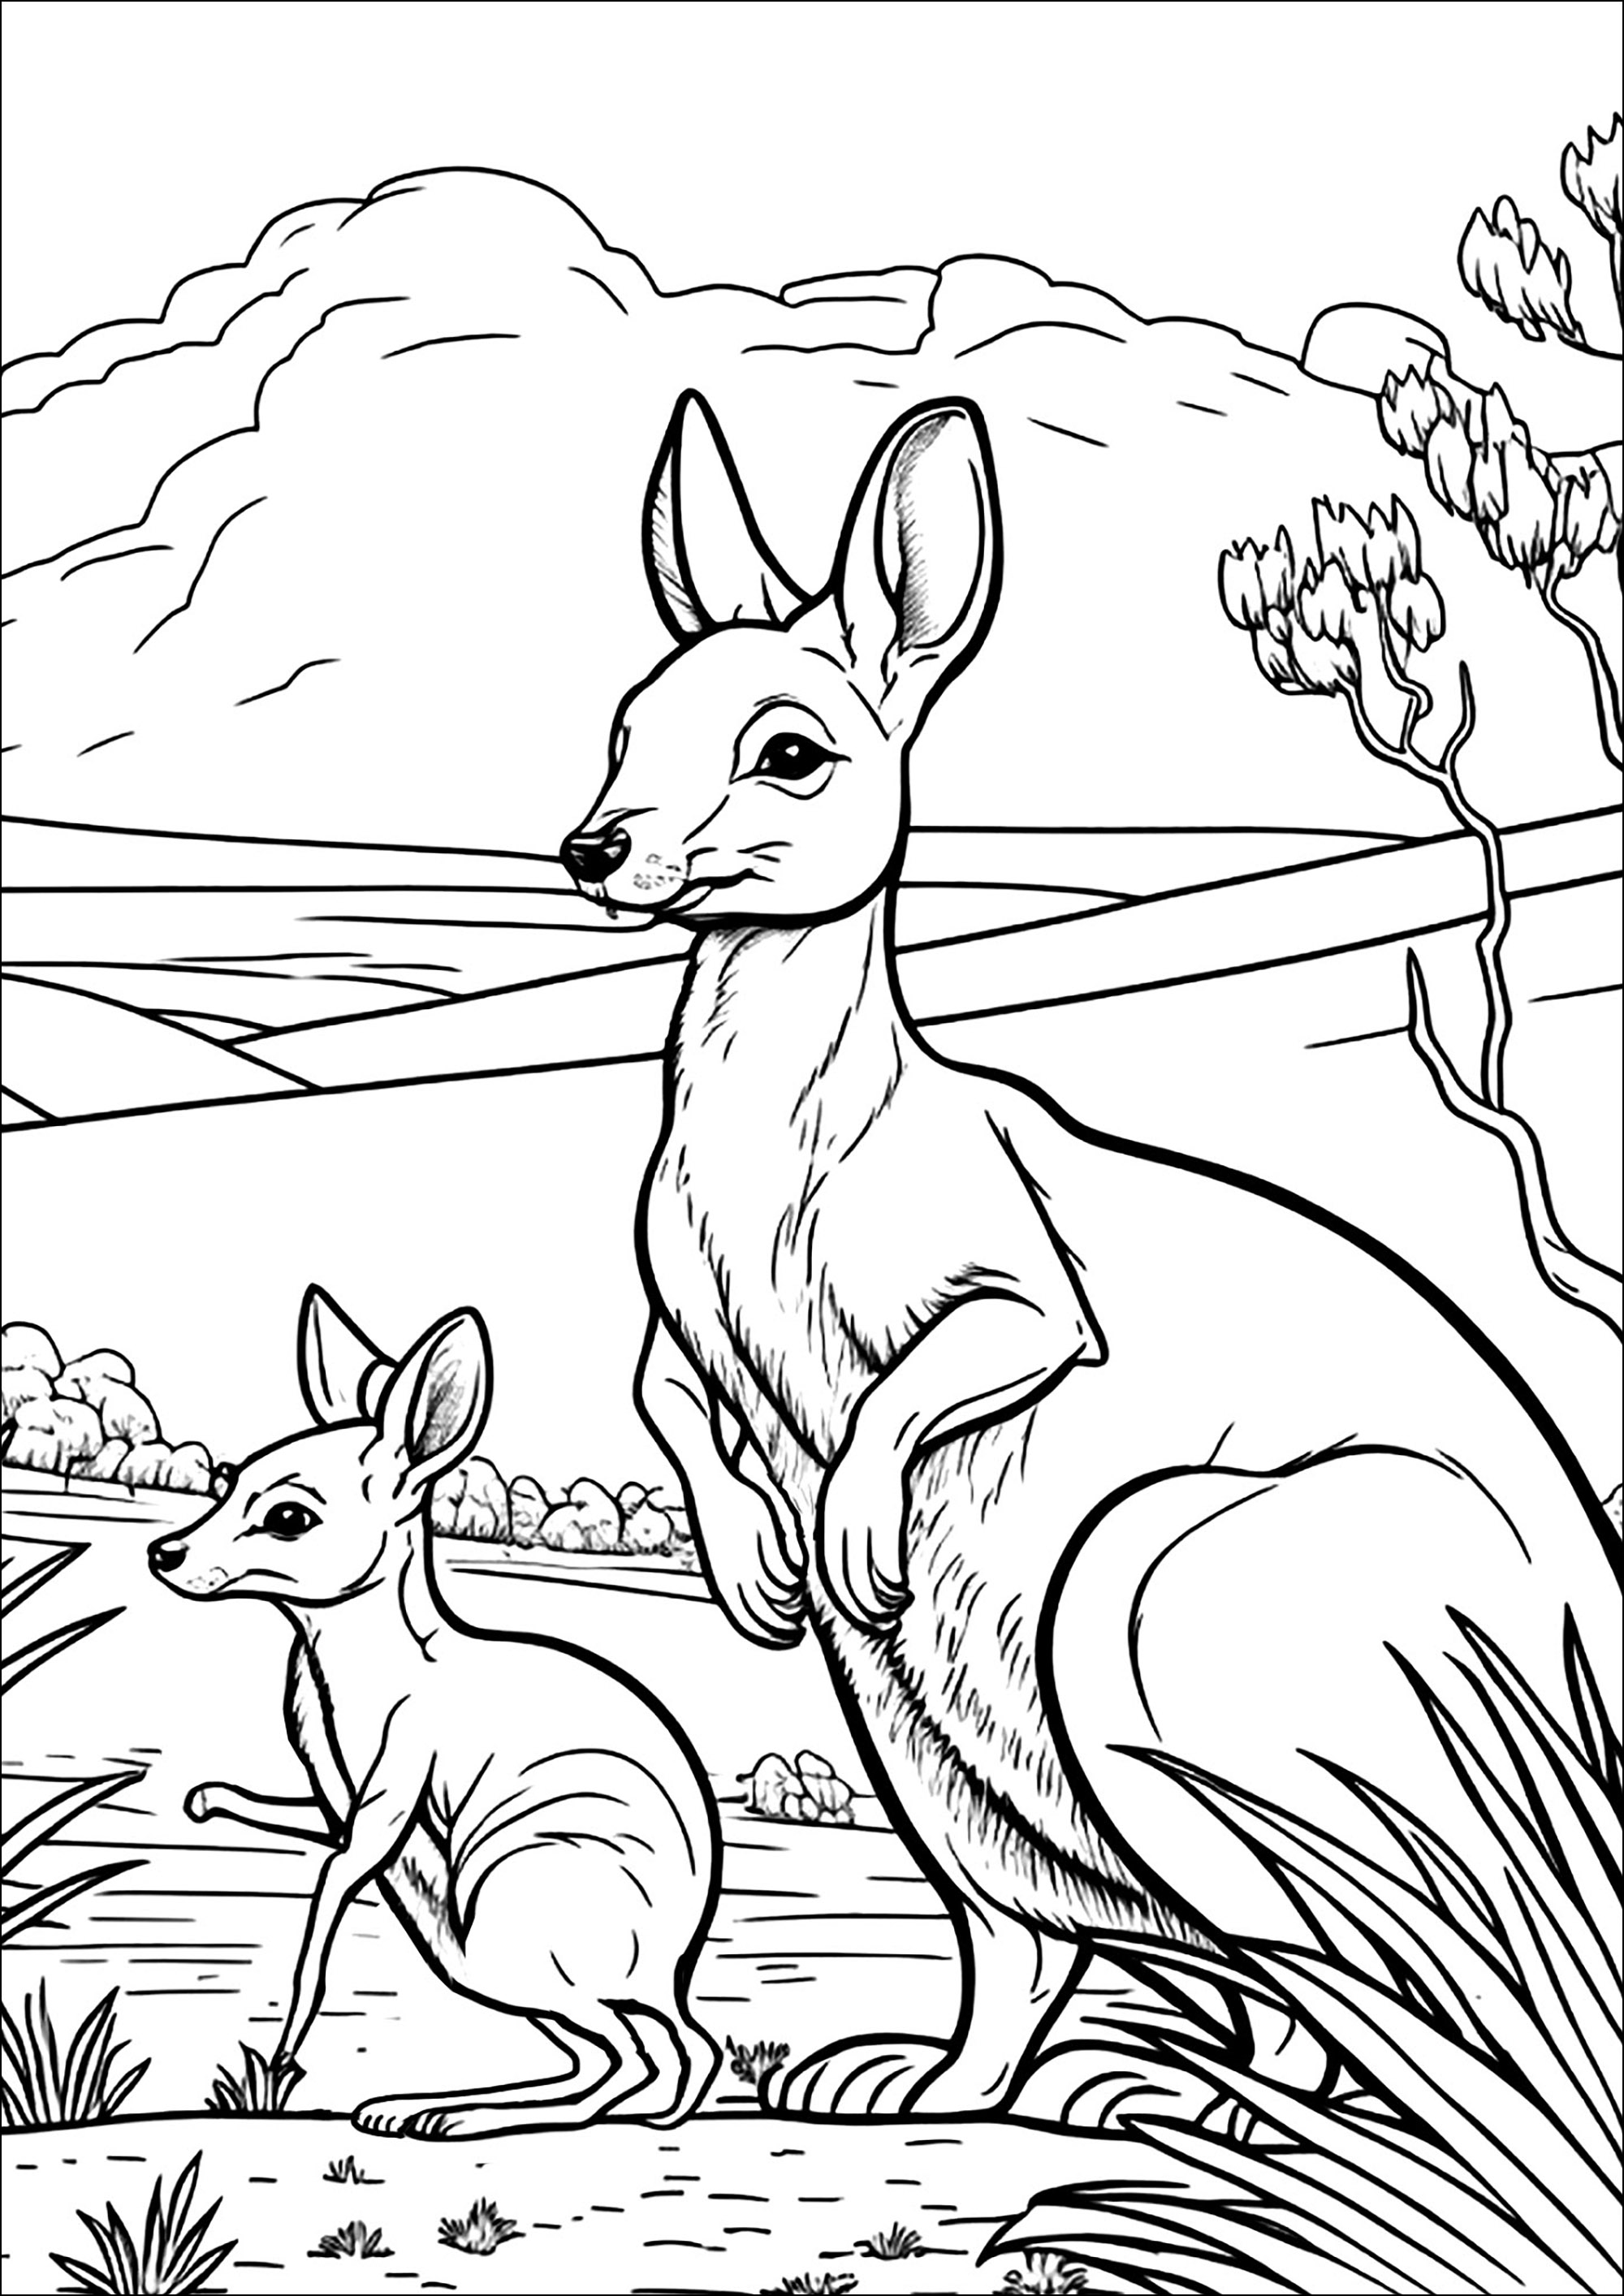 Color this mommy Kangaroo and her baby. The scene takes place in the Australian desert with rocks, cacti and dry plants. The colors you choose for this scene will give a magical character to this mother and her baby.